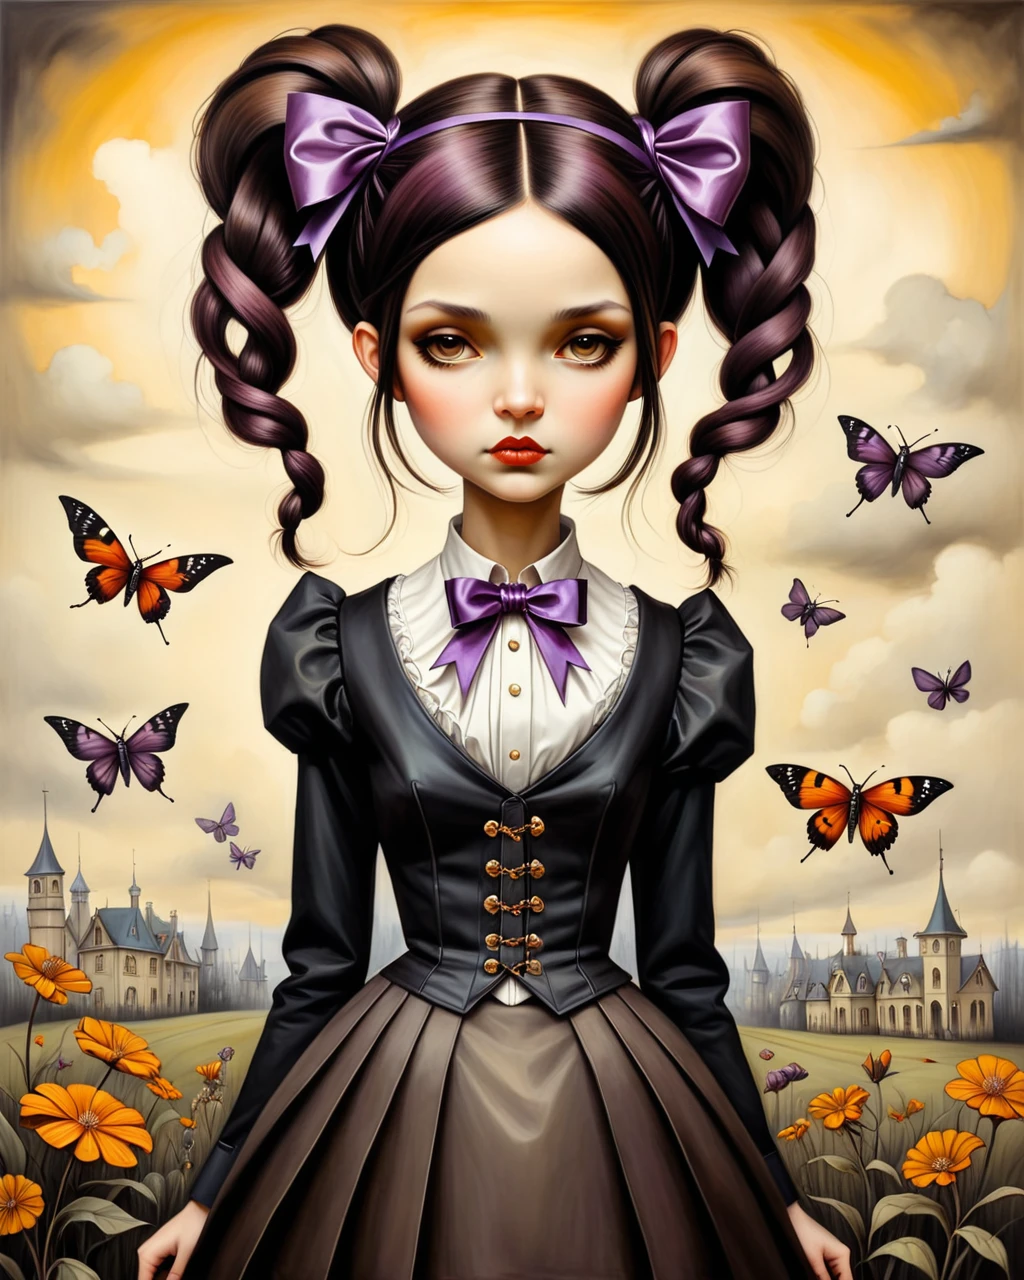 VIOLET BAUDELAIRE LEMONY SNICKET A SERIES OF UNFORTUNATE EVENTS GIRL WITH LONG BROWN HAIR PURPLE RIBBON BLUNT BANGS EDWARDIAN VICTORIAN GOTHIC STEAMPUNK INVENTOR origami style in the style of tente Andrews,tente Andrews style,tente Andrews art,tente Andrewsa painting of a girl gothic wednesday addams pale black hair two braids style of tente Andrews, estilo artístico de andrews esao, inspired por Esaú Andrews, tente Andrews ornate, por Esaú Andrews, tente Andrews, inspired por ESAO, por ESAO,  earley, shrubs and flowers tente Andrews, benjamin lacombe, 1 garota, bug in the style of tente Andrews, tente Andrews . arte em papel, papel plissado, guardada, arte origami, Pregas, Corte e dobre, composição centrada